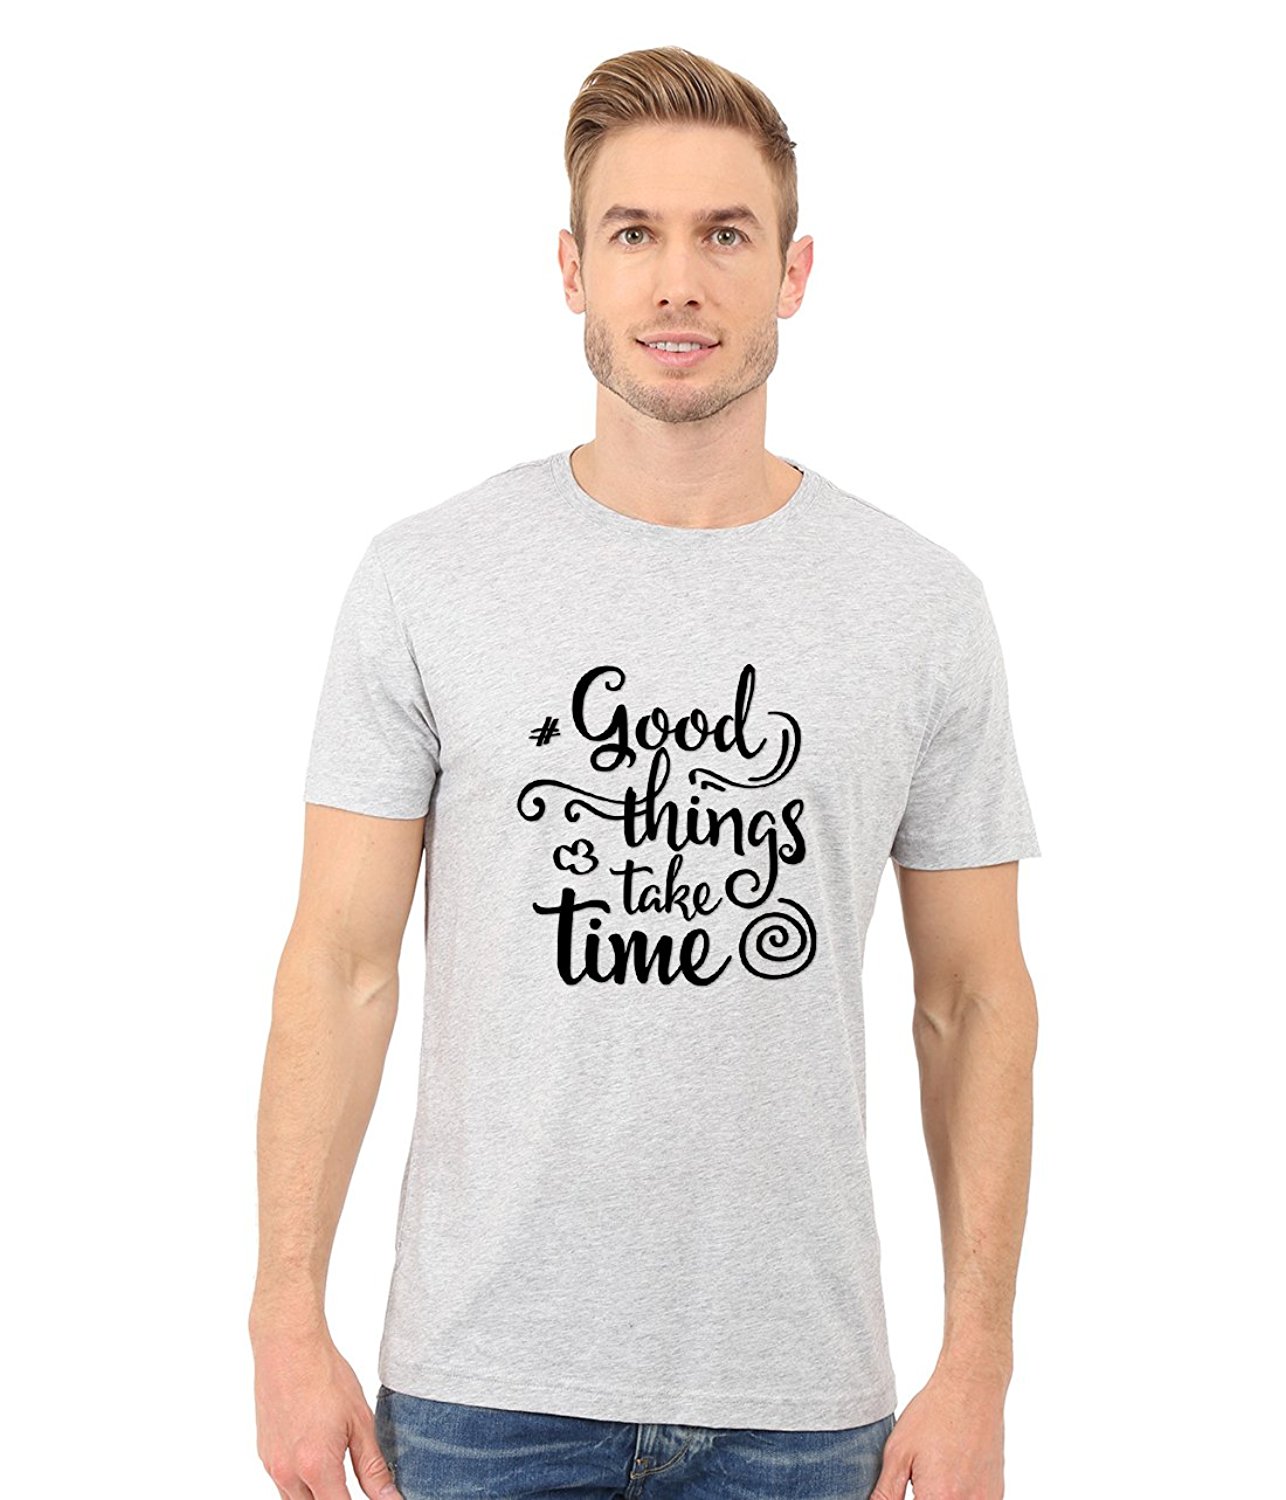 DOUBLE F ROUND NECK HALF SLEEVE GOOD THINKS TAKE TIME WITH 09 COLORS PRINTED T-SHIRT FOR MEN